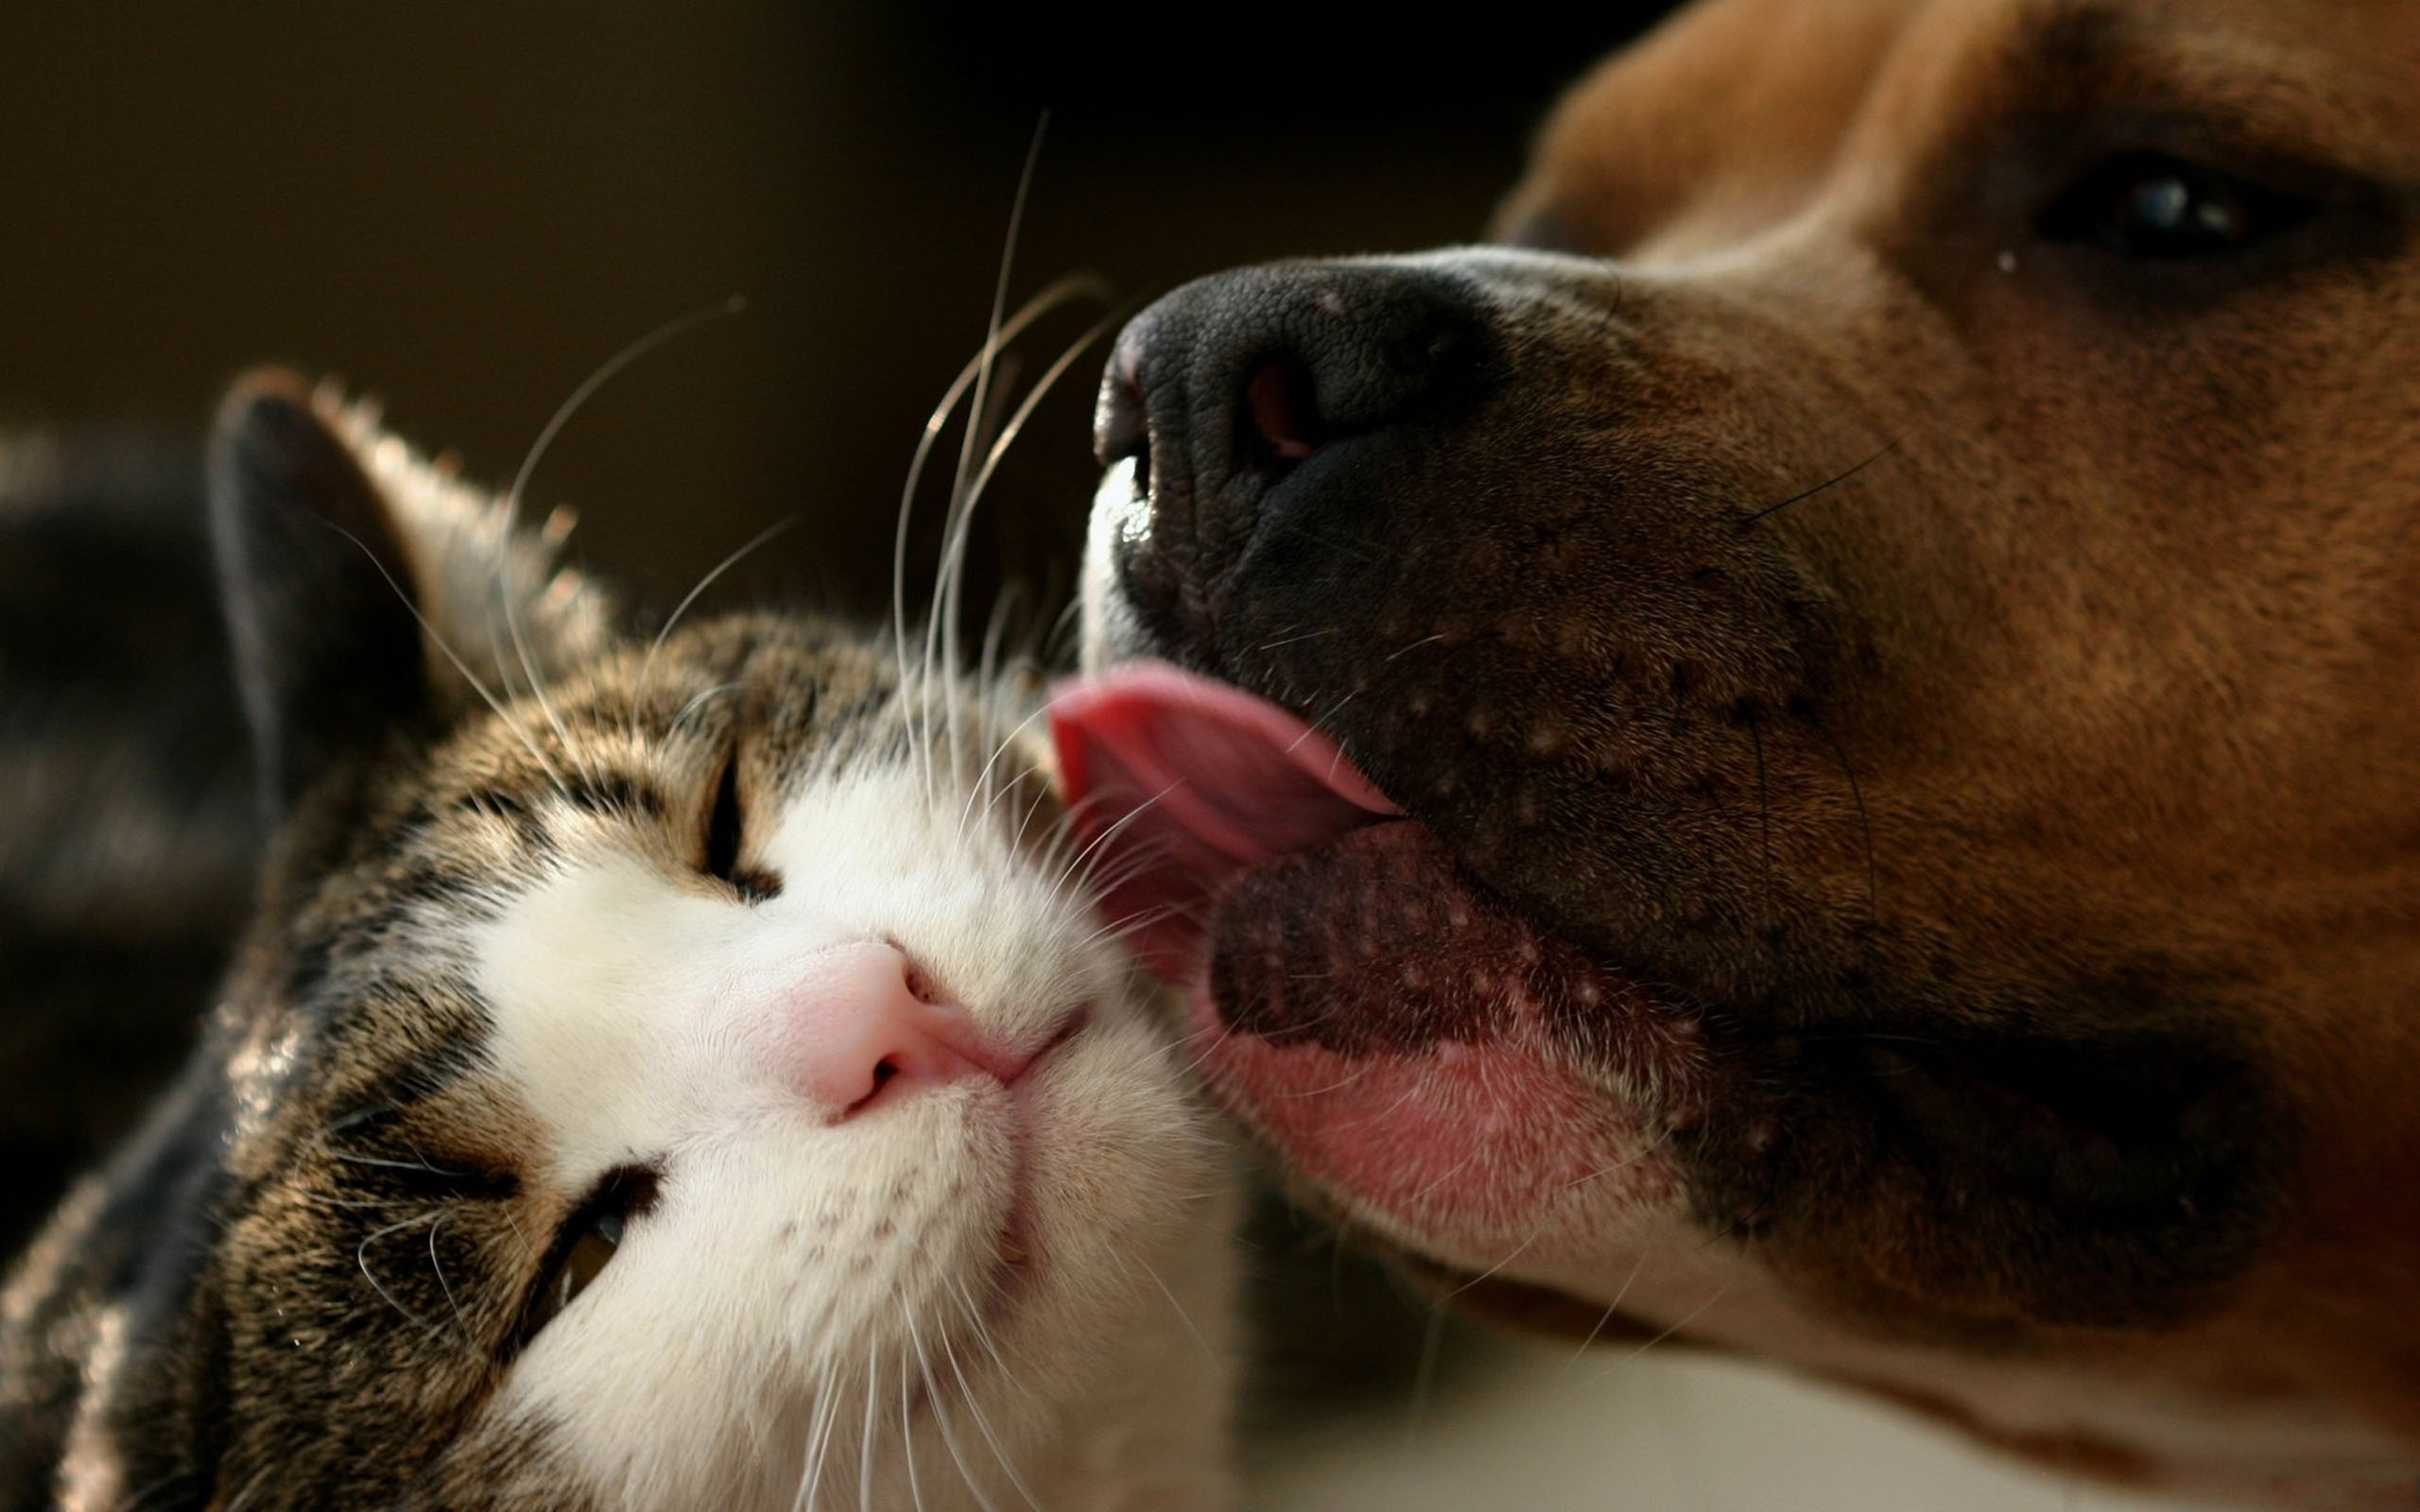 Cats And Dogs Wallpaper